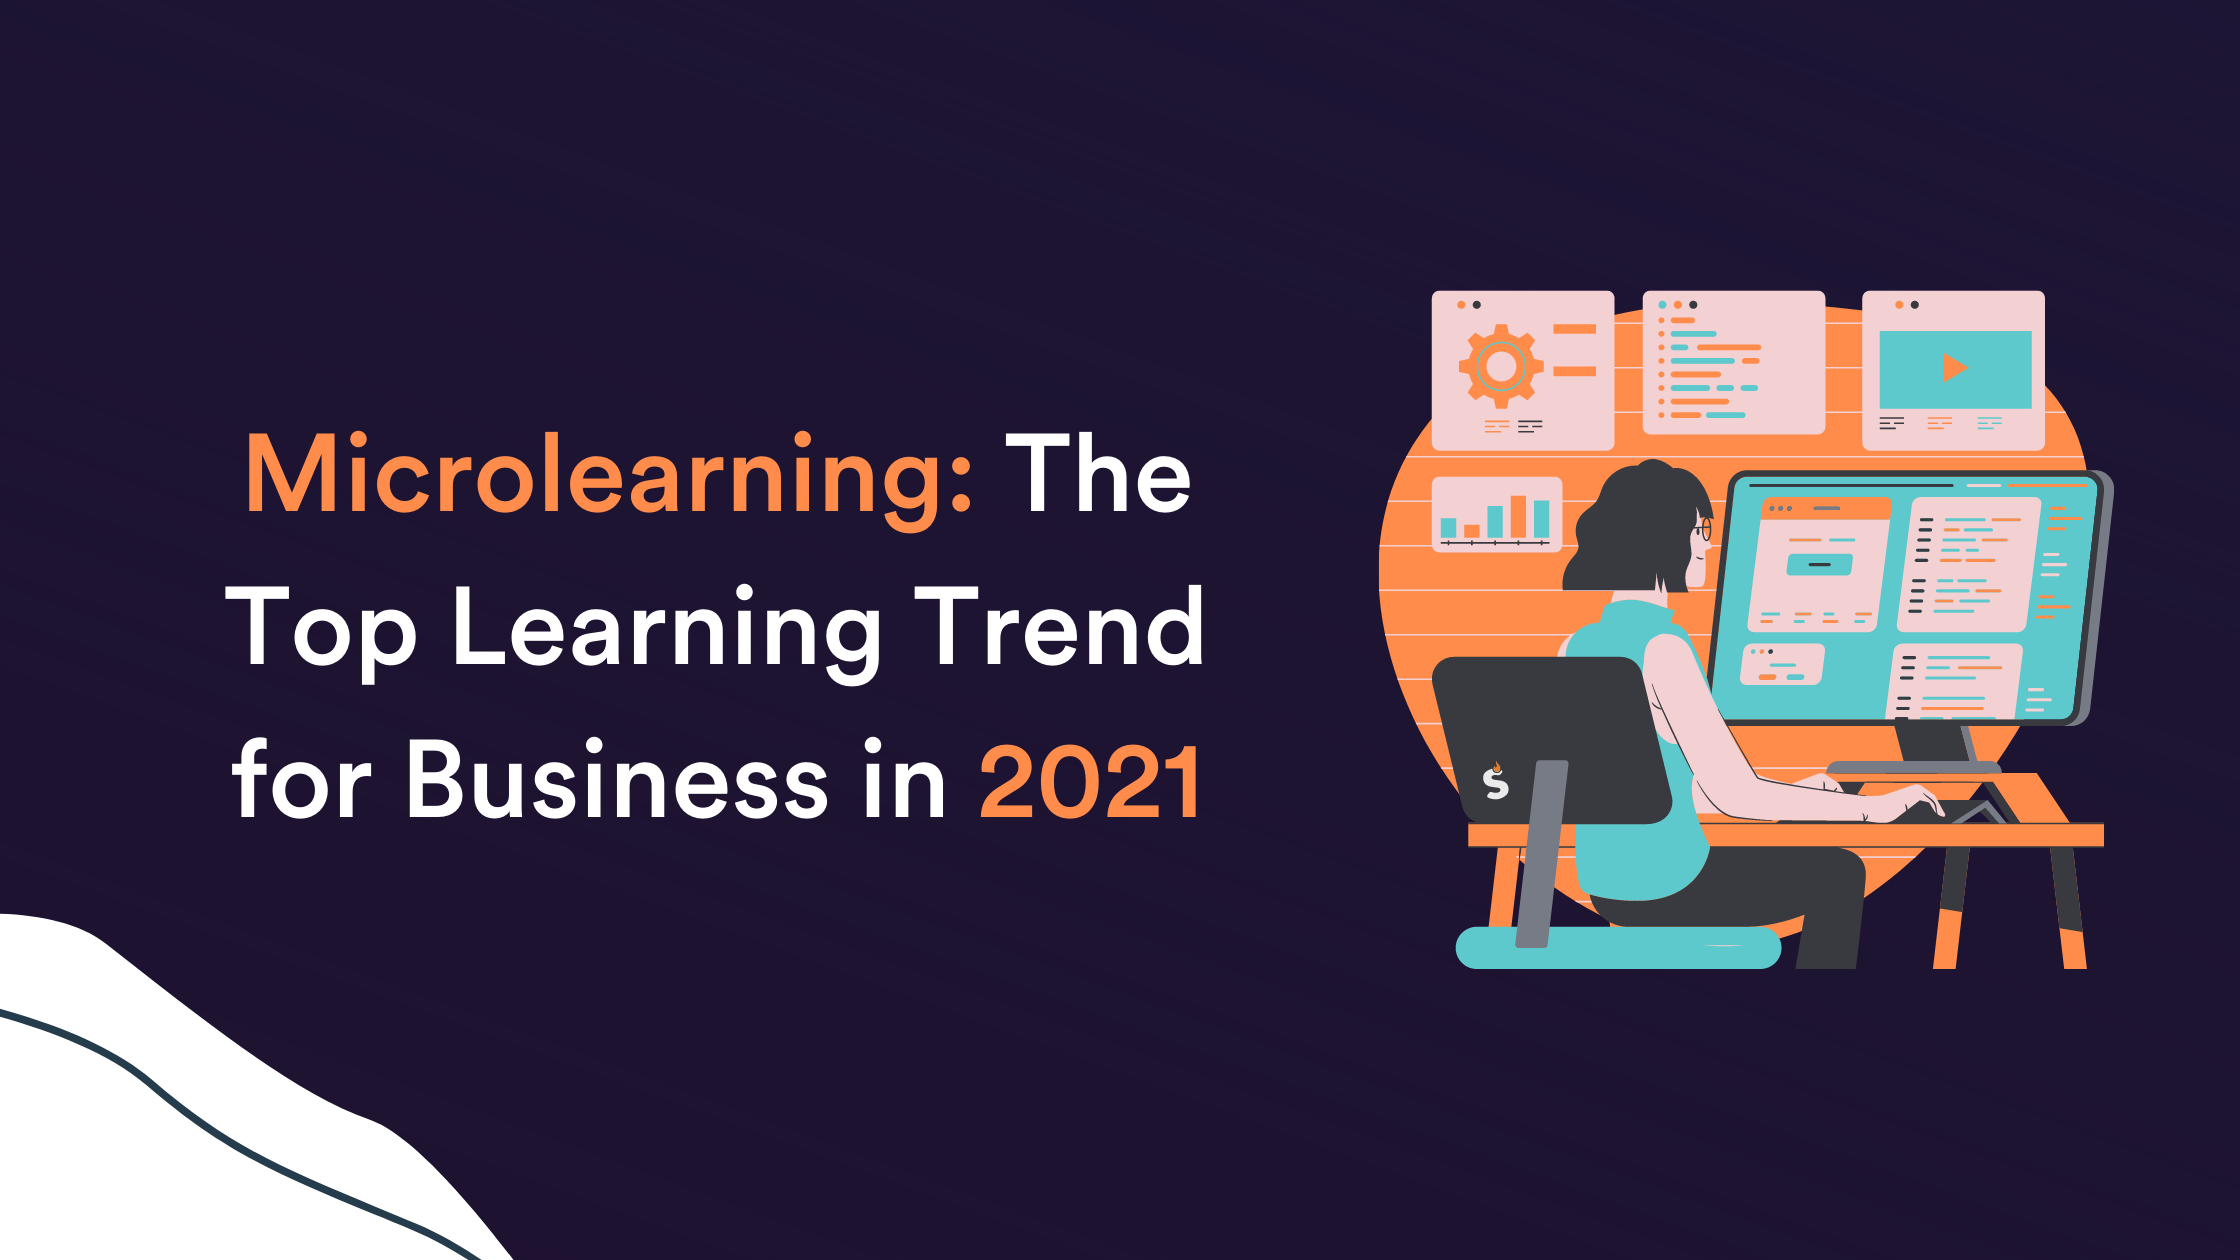 Microlearning: The Top Learning Trend for Business in 2021